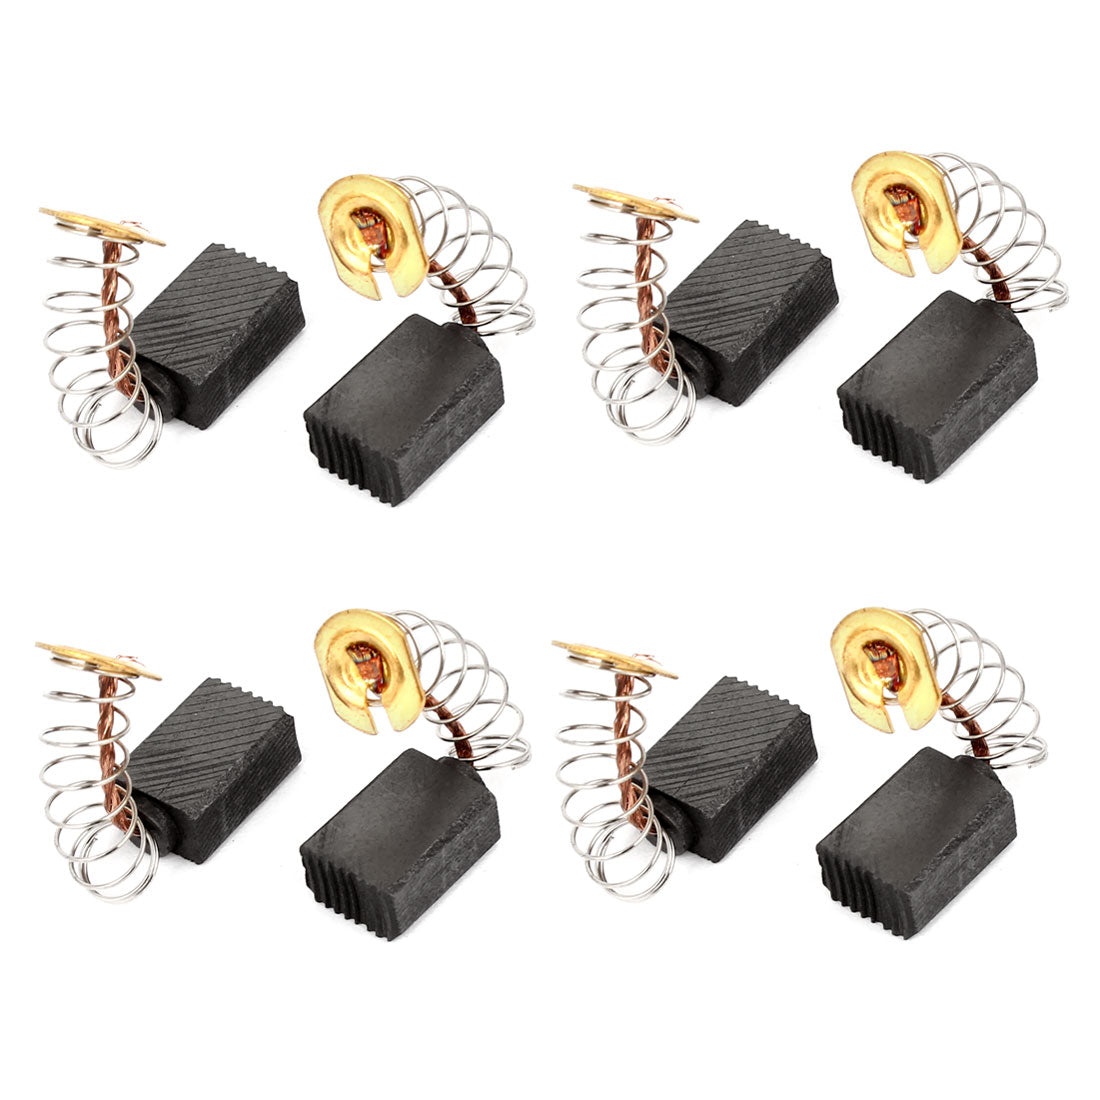 Uxcell Uxcell 8 Pcs Electric Drill Motor Carbon Brushes 12mm x 9mm x 6mm